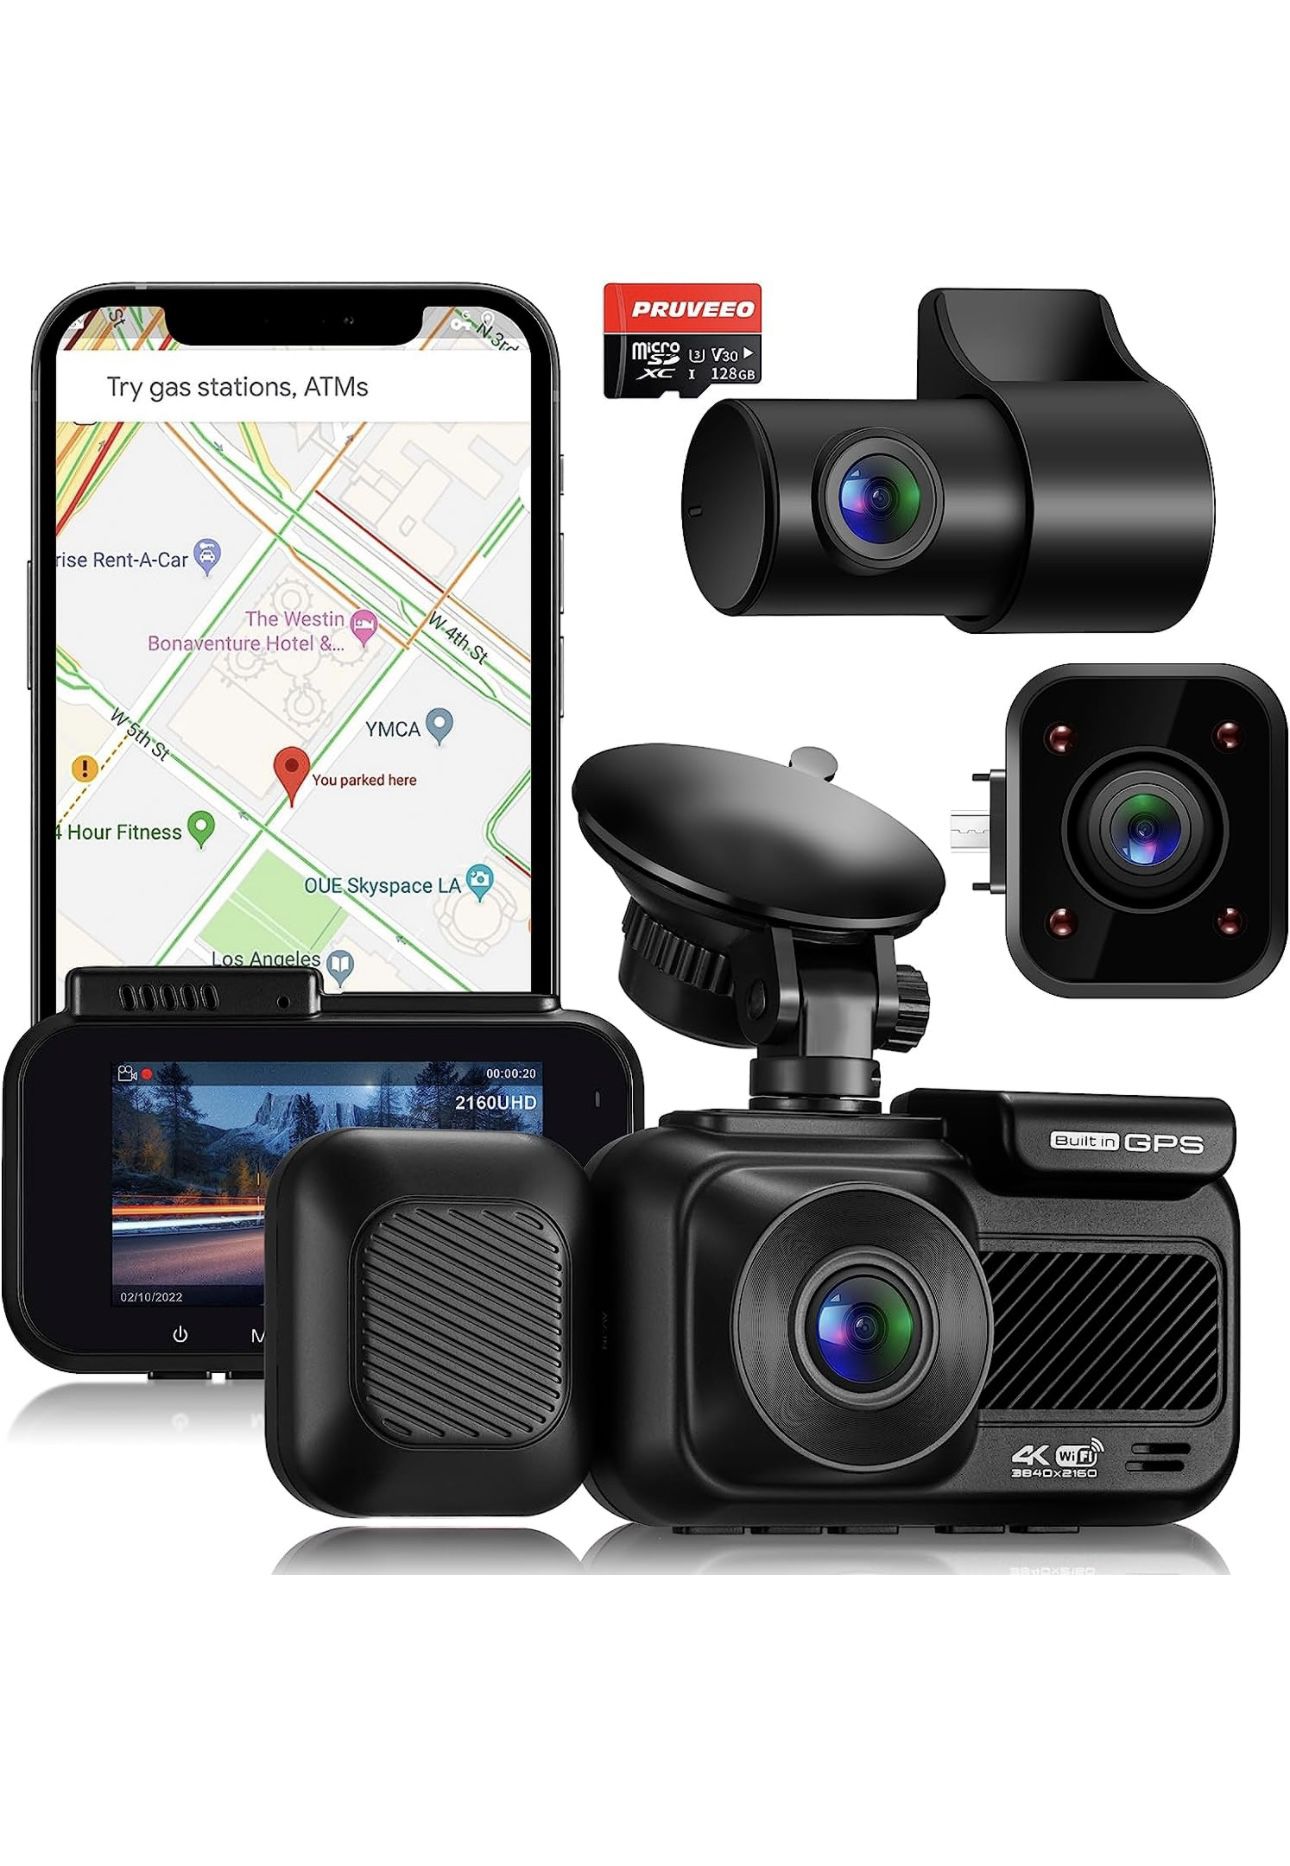 Pruveeo 3 Channel Dash Cam Front and Rear Inside, 1440P+1080P+1080P, 4K+1080P Dual, GPS 5G Wi-Fi Parking Monitoring, Free 128GB Card